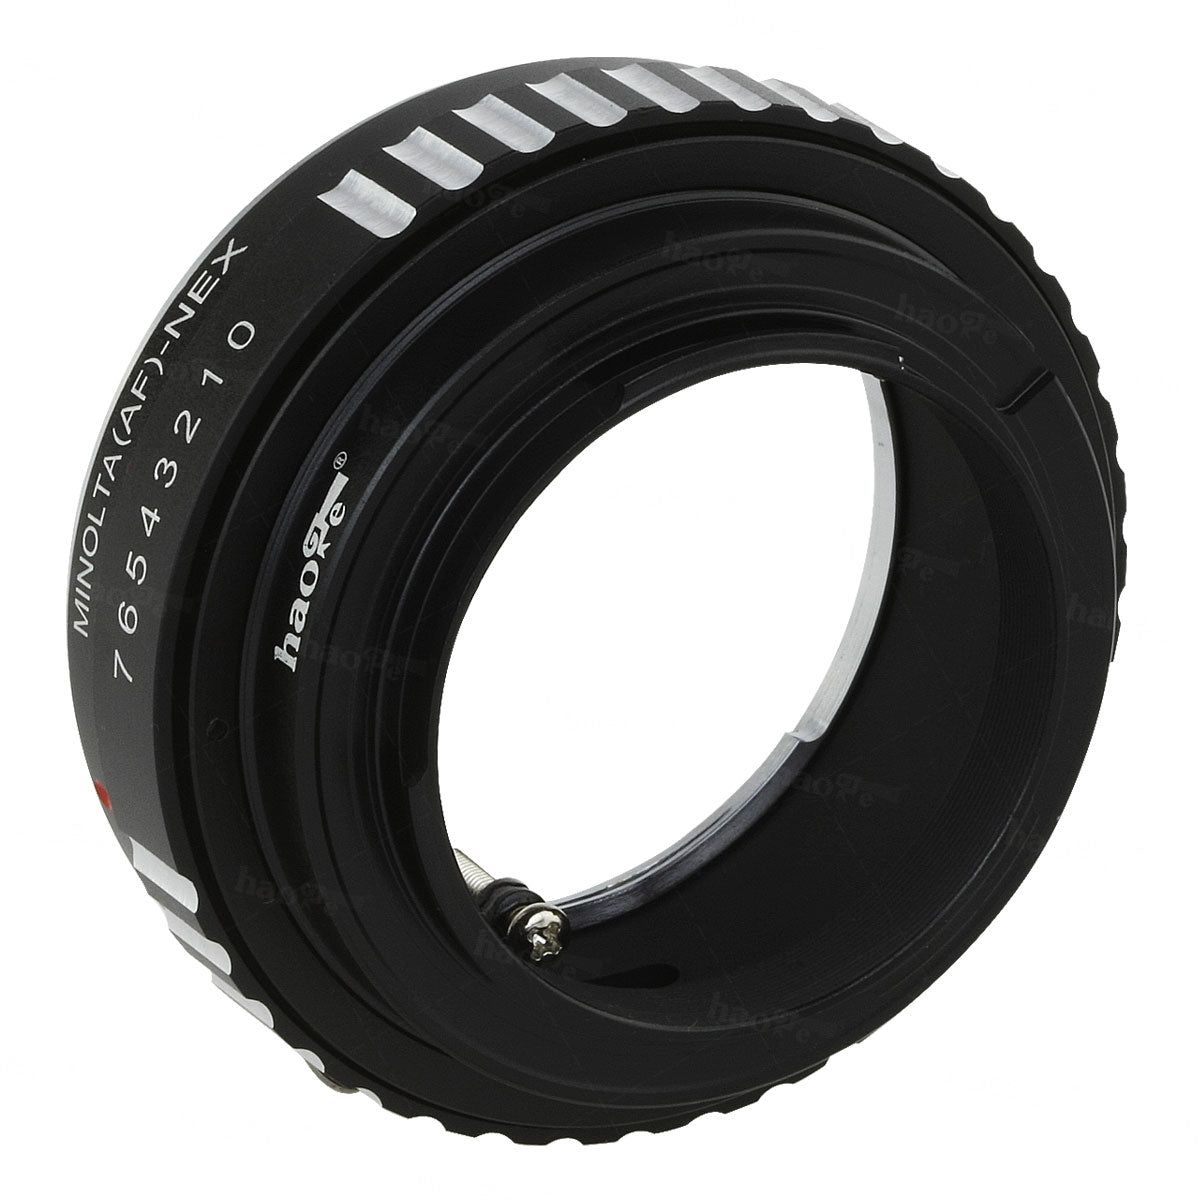 Haoge Lens Mount Adapter for Sony Alpha Minolta A-type Mount Lens to Sony E-mount NEX Camera such as NEX-3, NEX-5, NEX-5N, NEX-7, NEX-7N, NEX-C3, NEX-F3, a6300, a6000, a5000, a3500, a3000, VG10, VG20